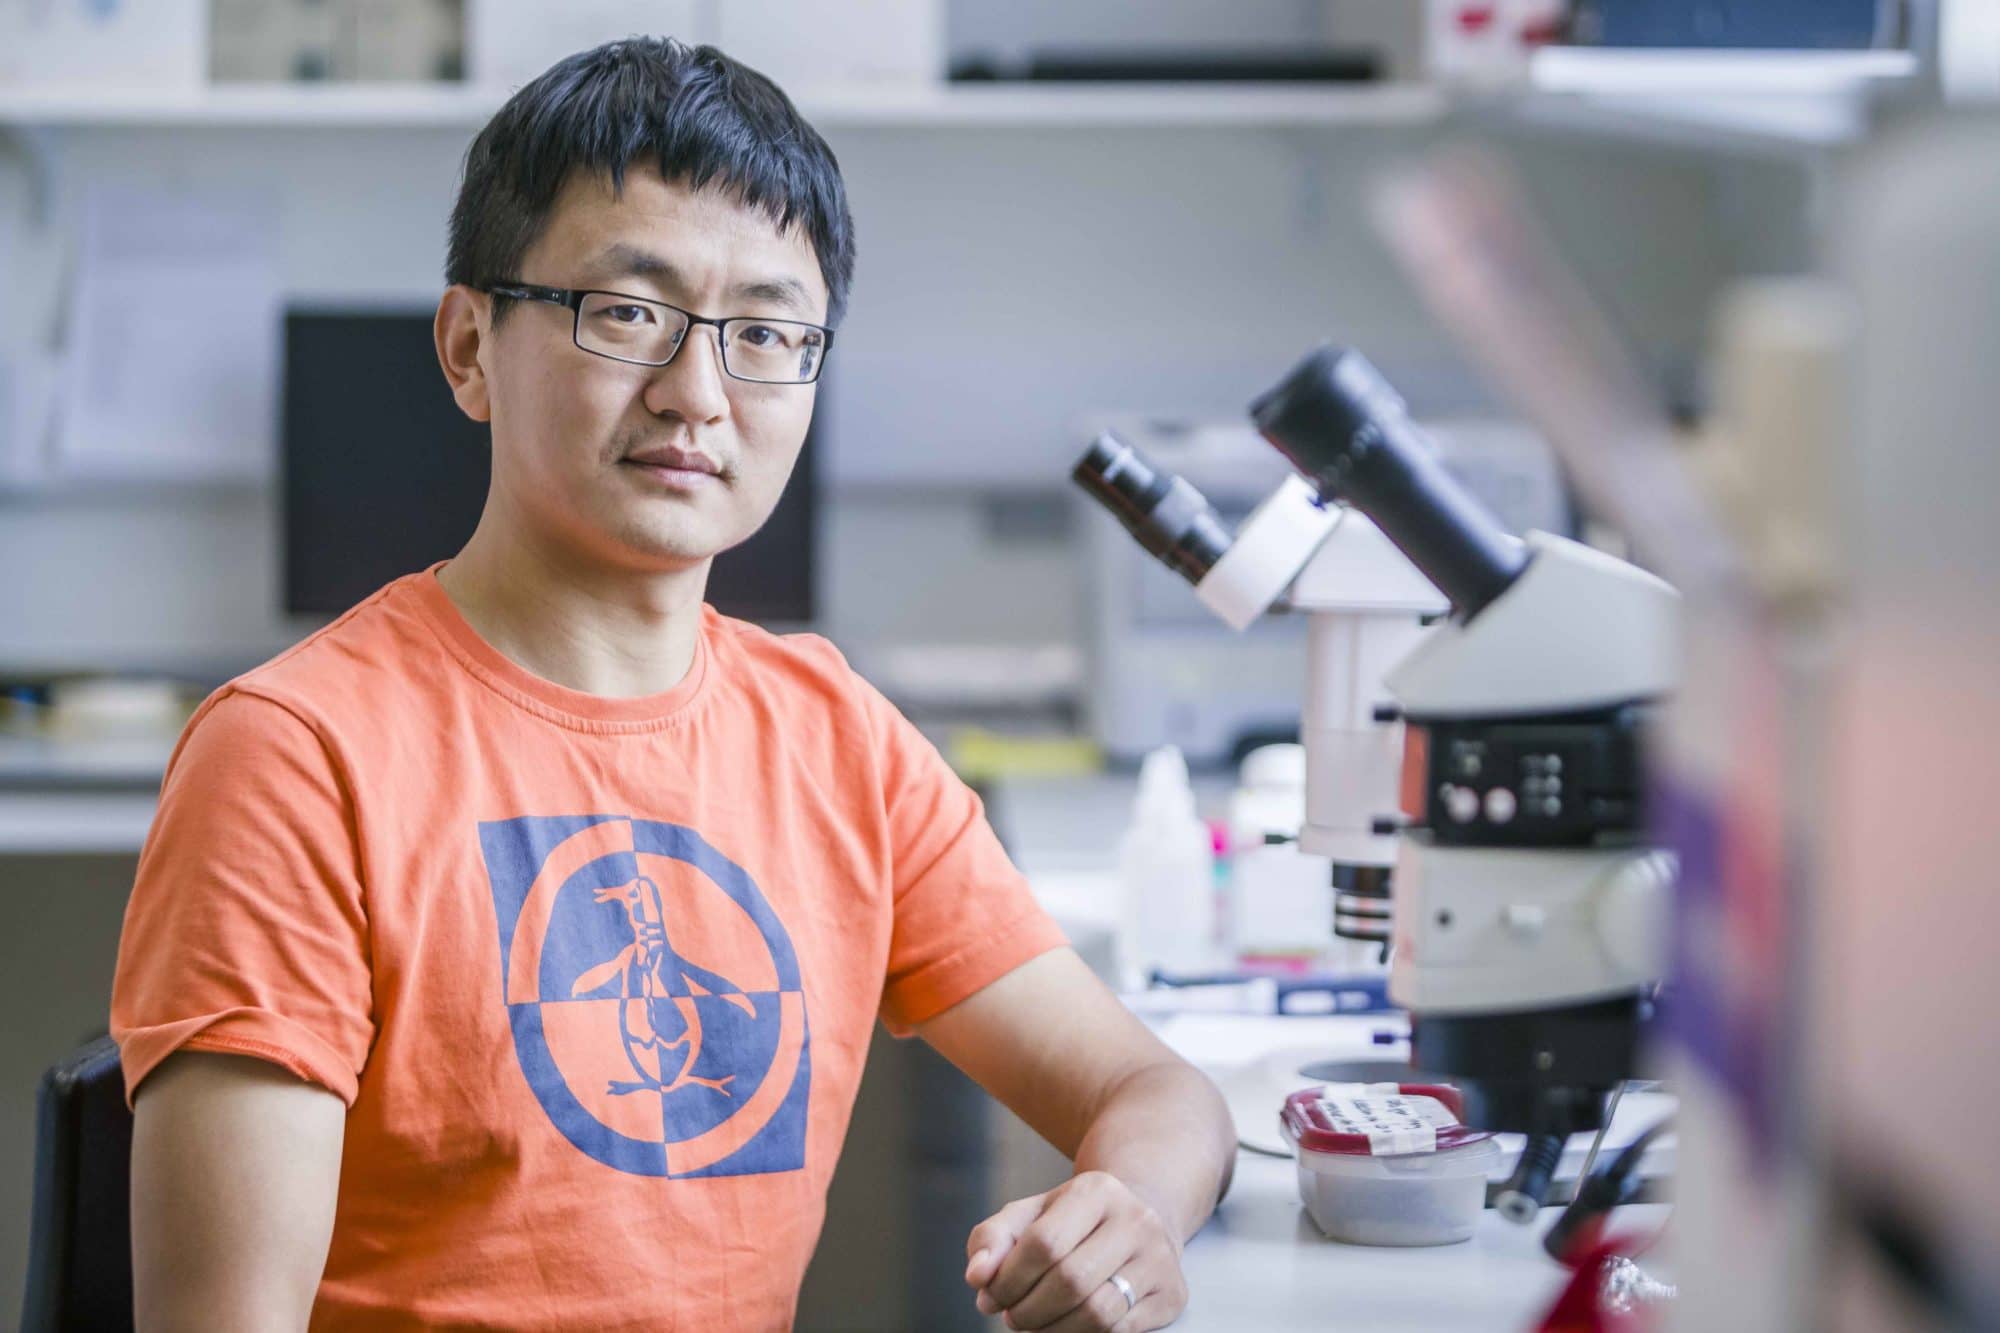 Jing Yu - a man wearing an orange t shirt facing the camera. There is a microscope to his left on a desk.